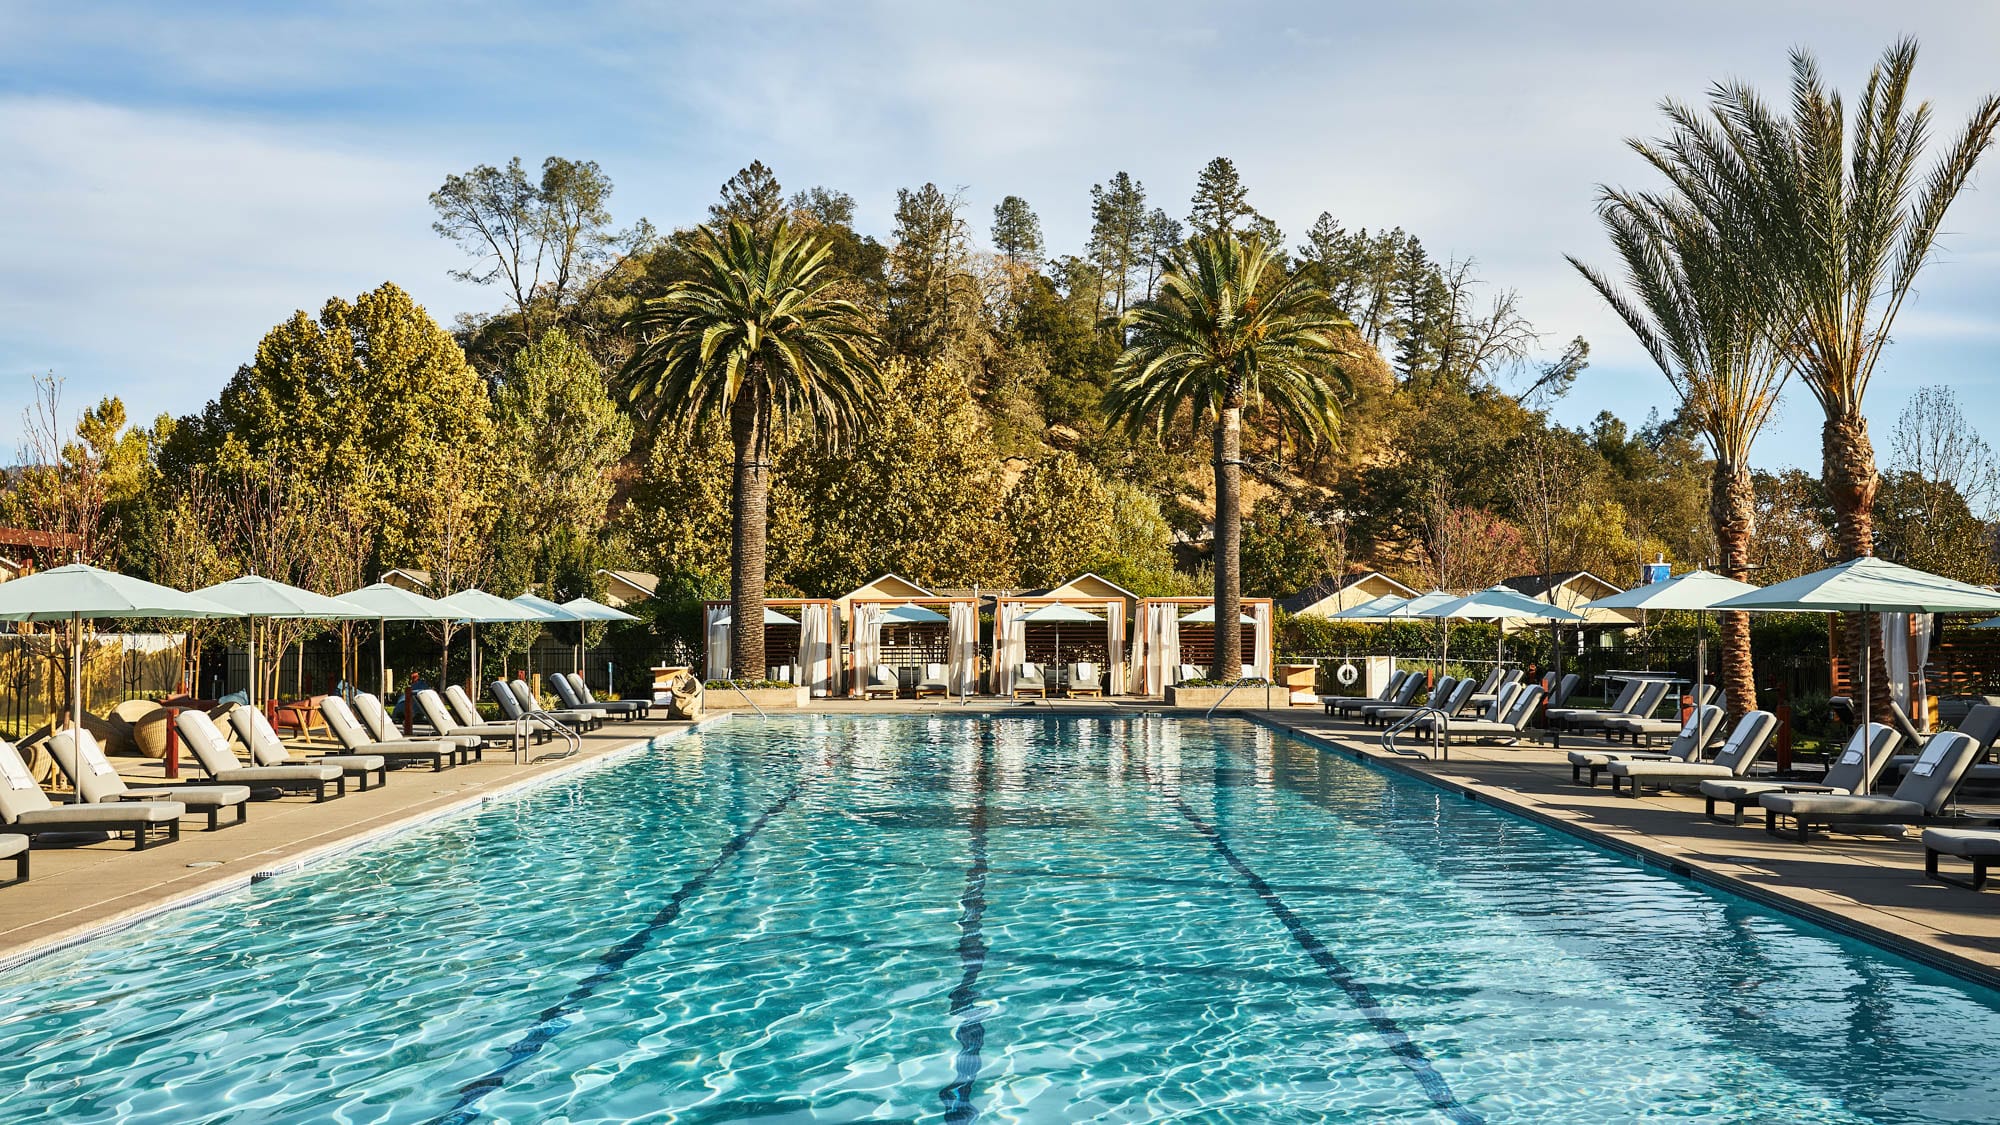 Lounge chairs around a pool at one of the best wellness retreats in Napa Valley, CA.